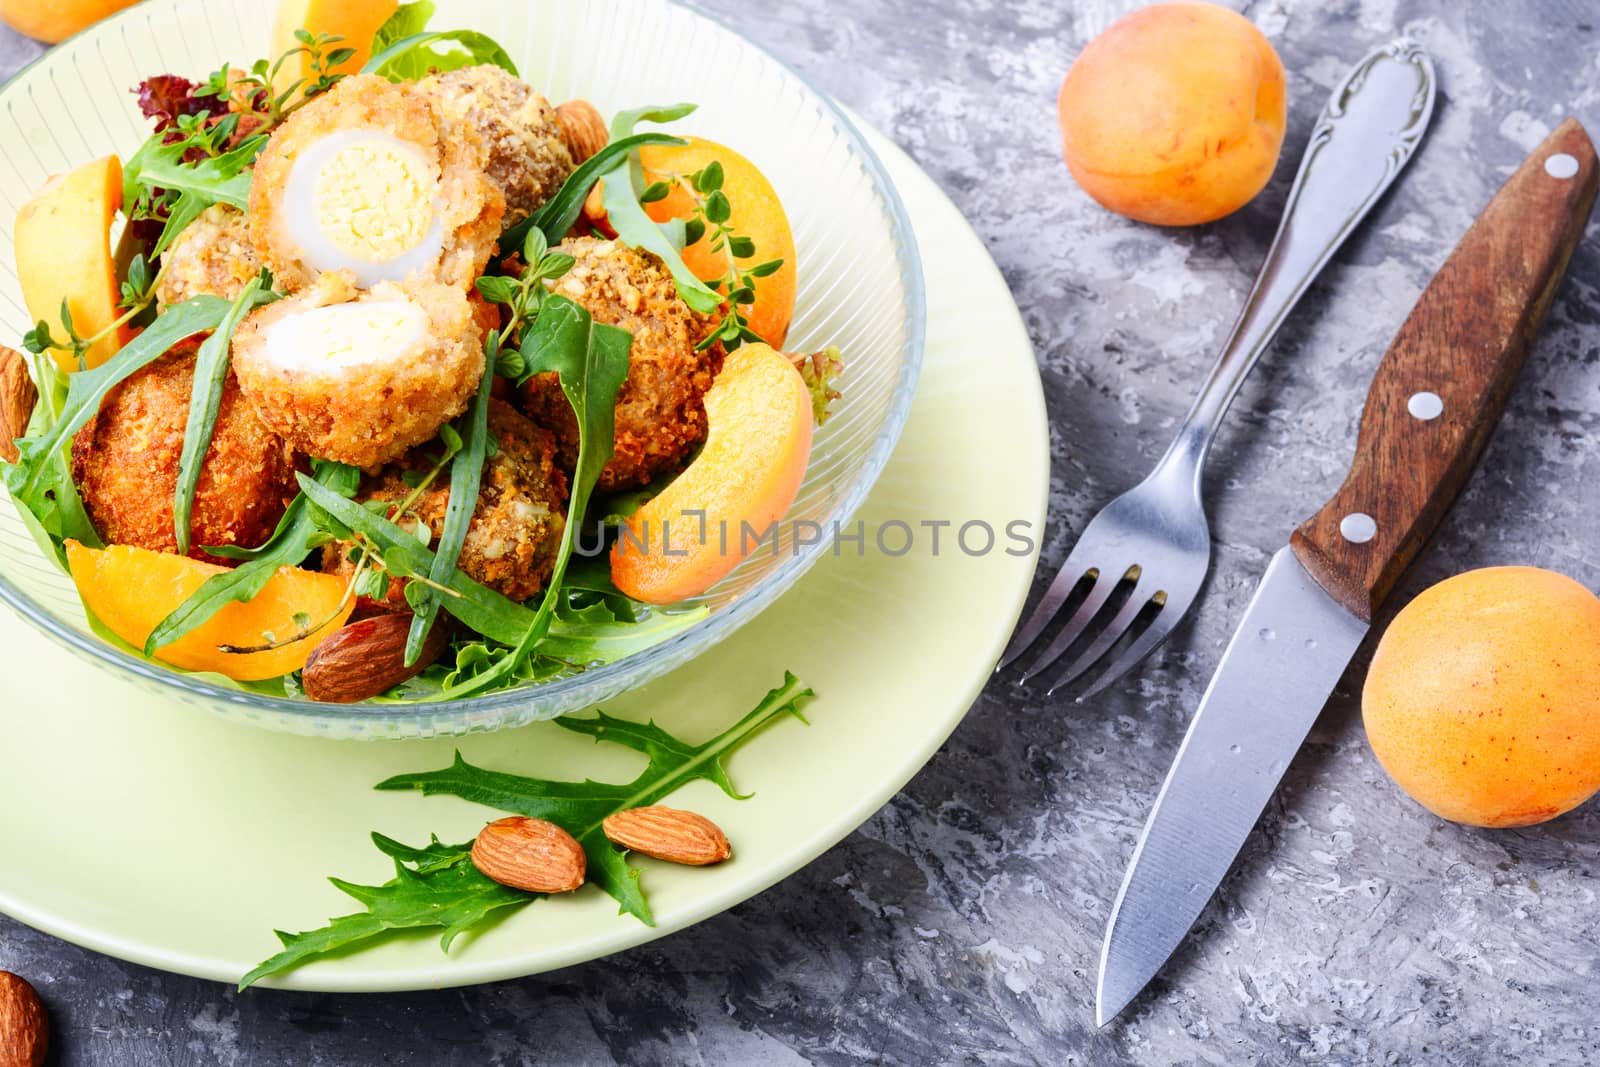 Summer salad with apricot, egg and greens.Healthy food